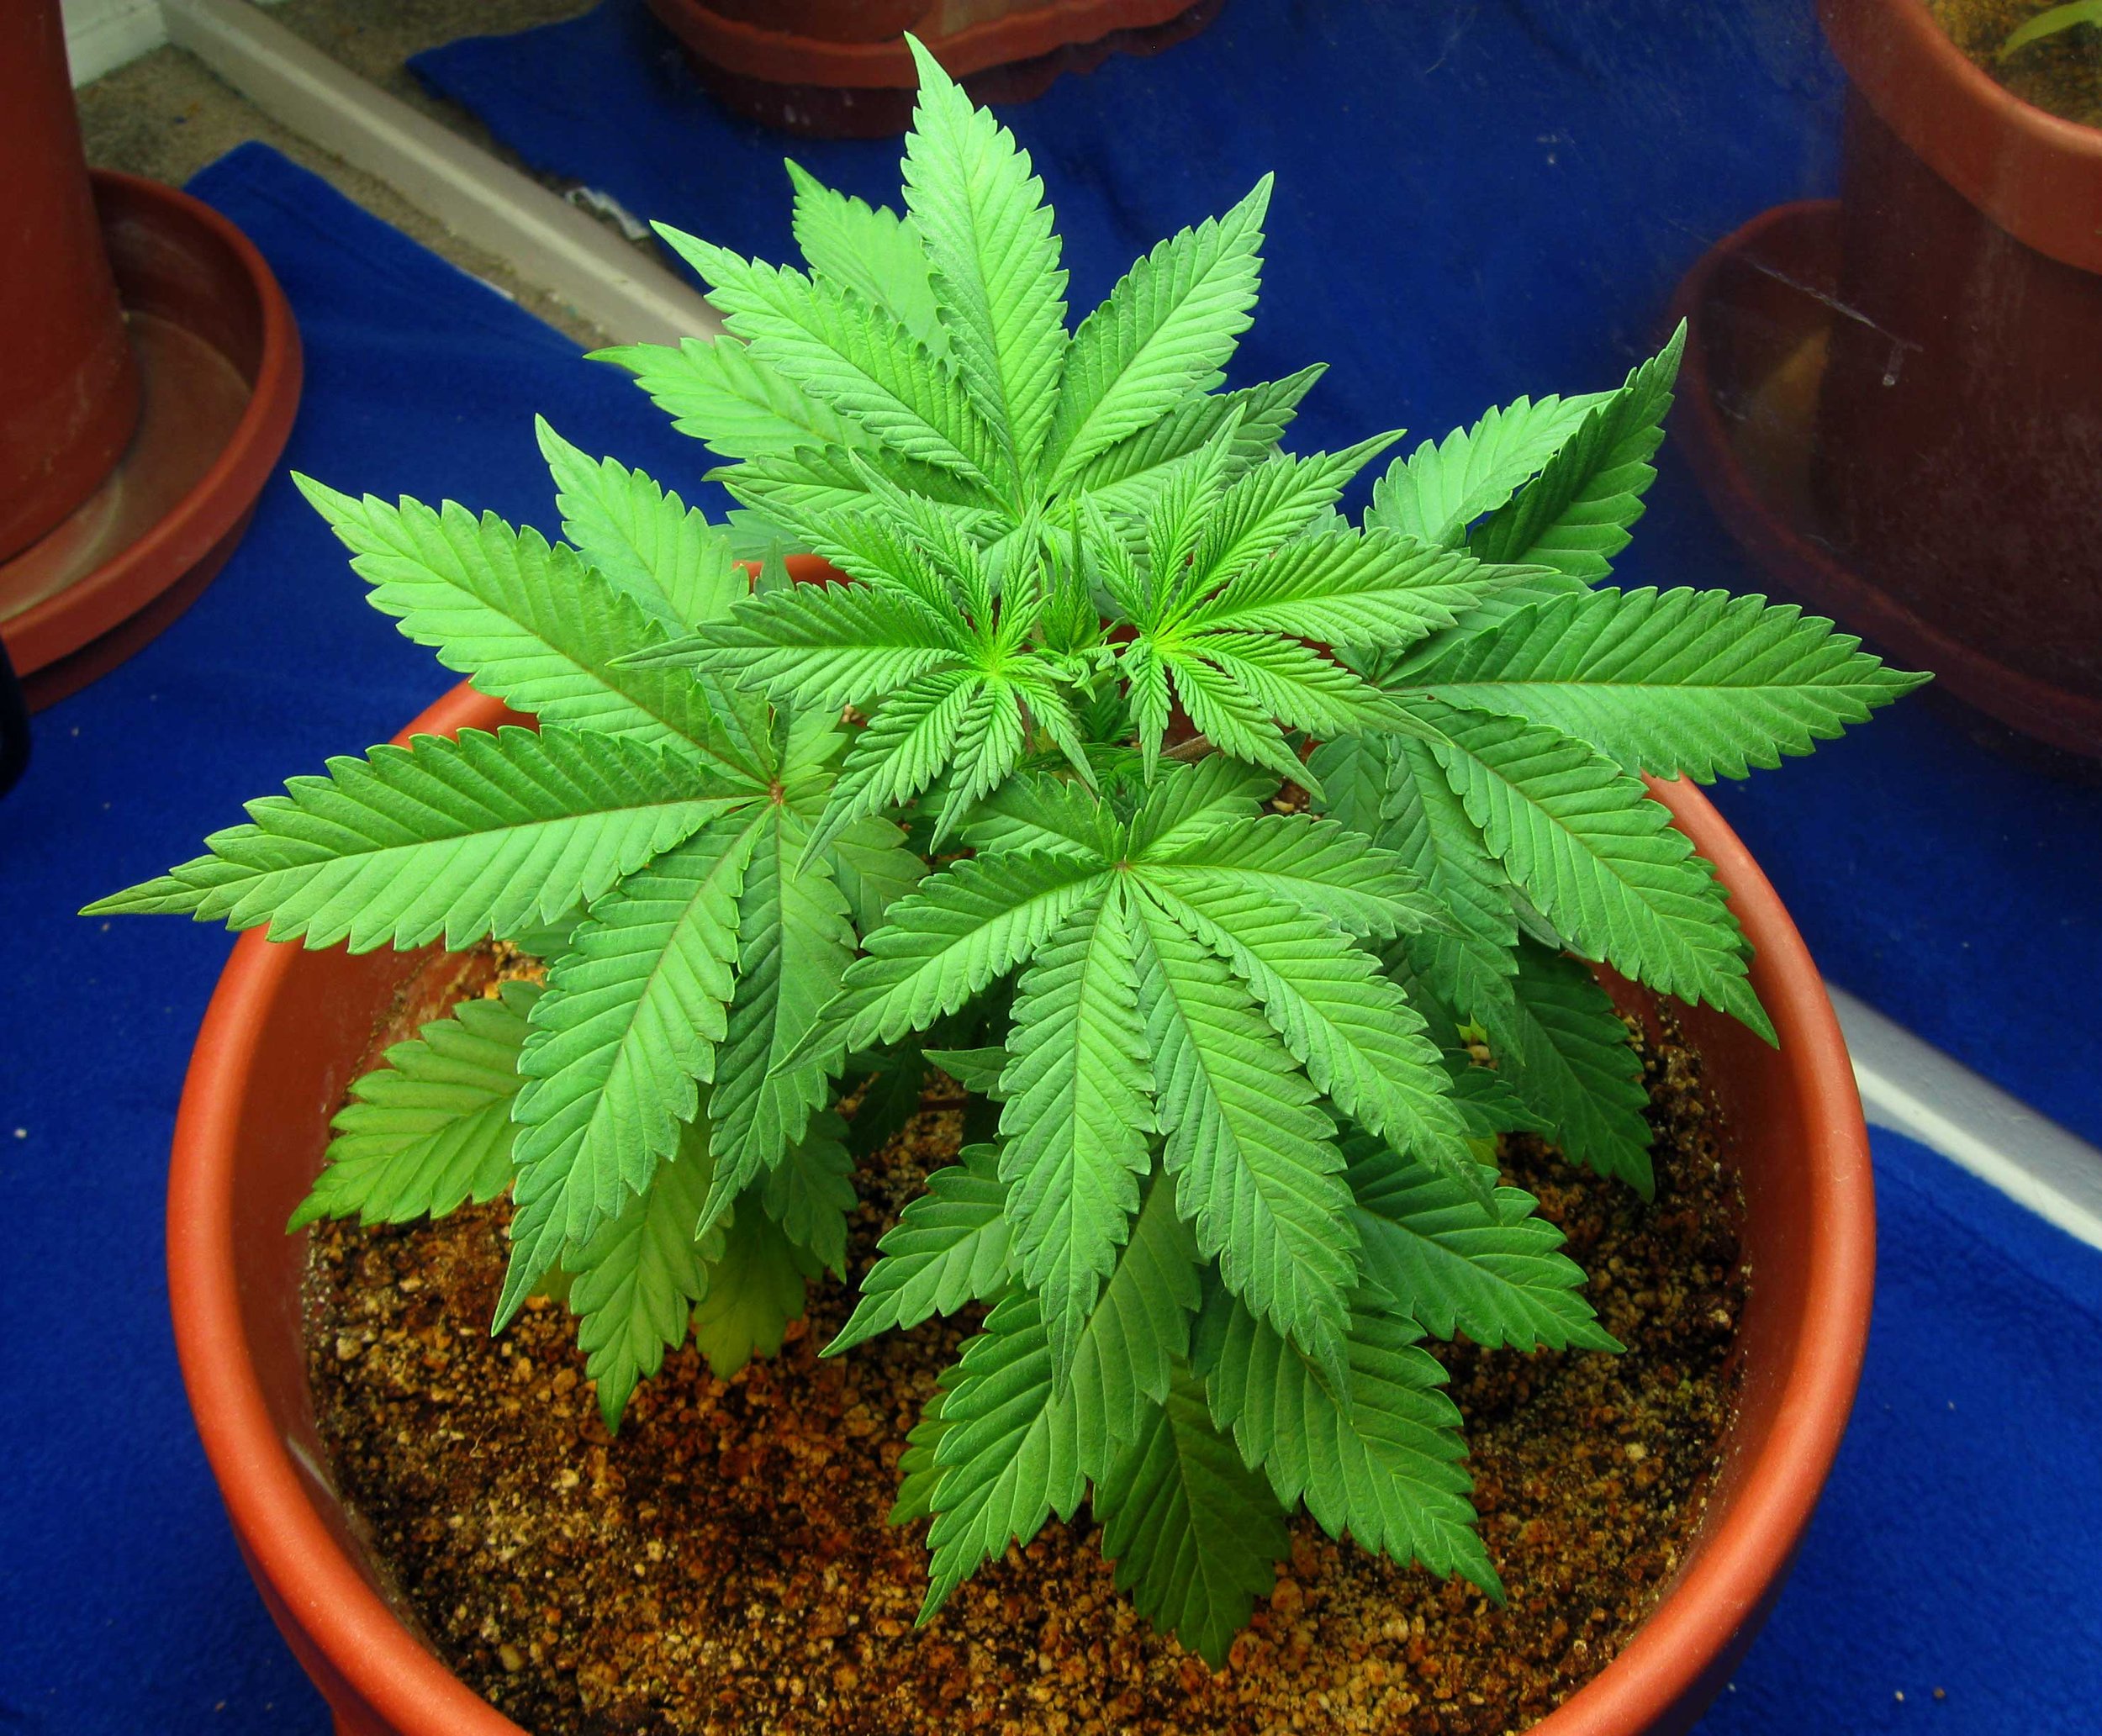 Young_cannabis_plant_in_the_vegetative_stage_01.jpeg